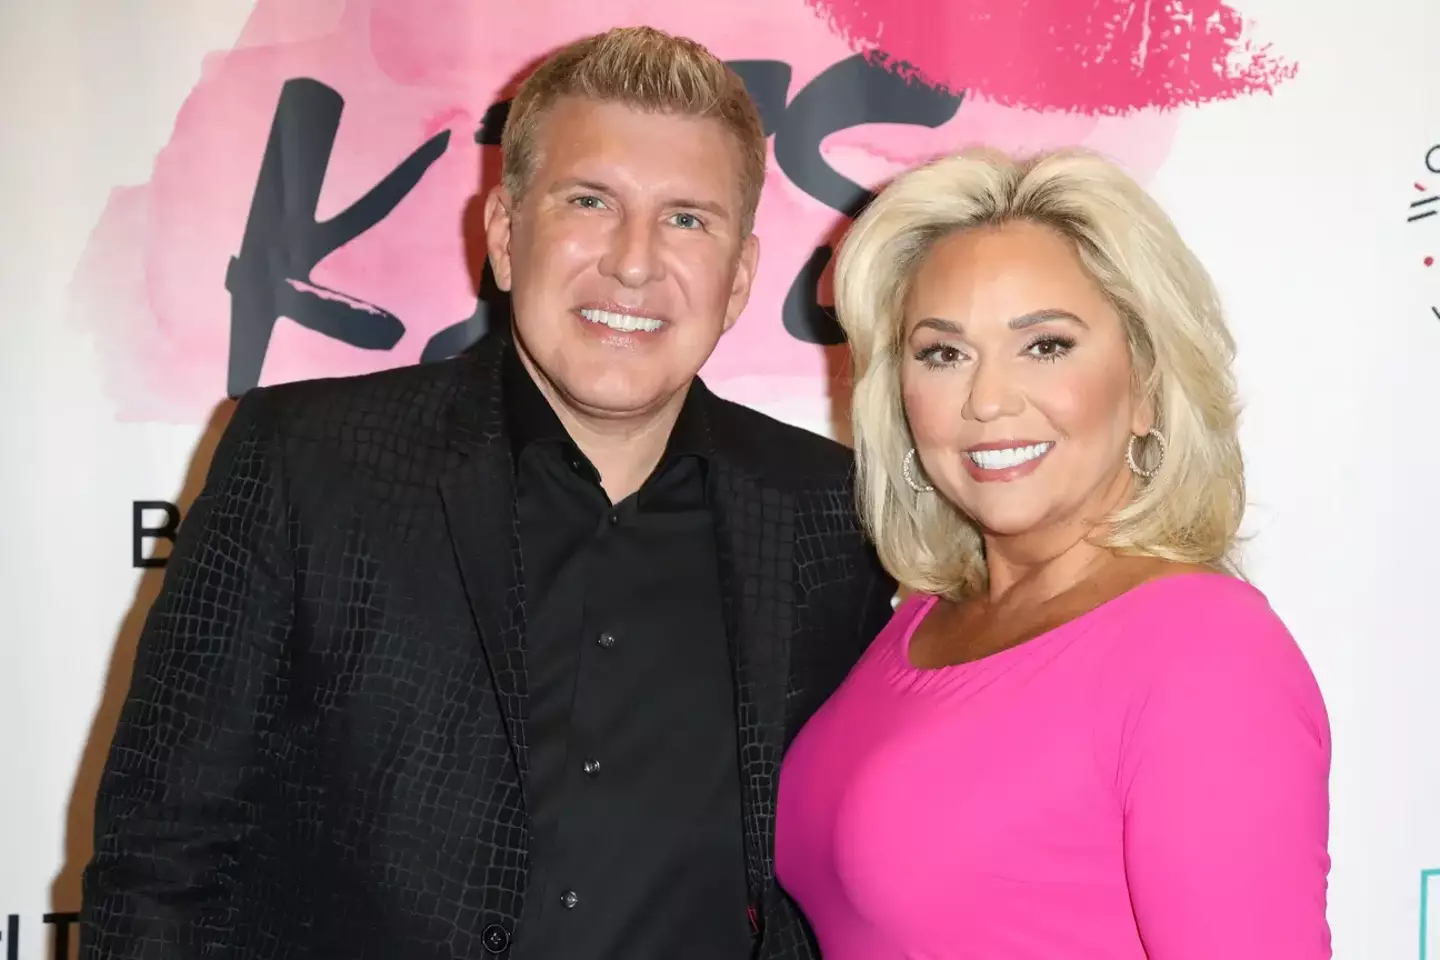 Todd and Julie Chrisley have been jailed for fraud and tax evasion.